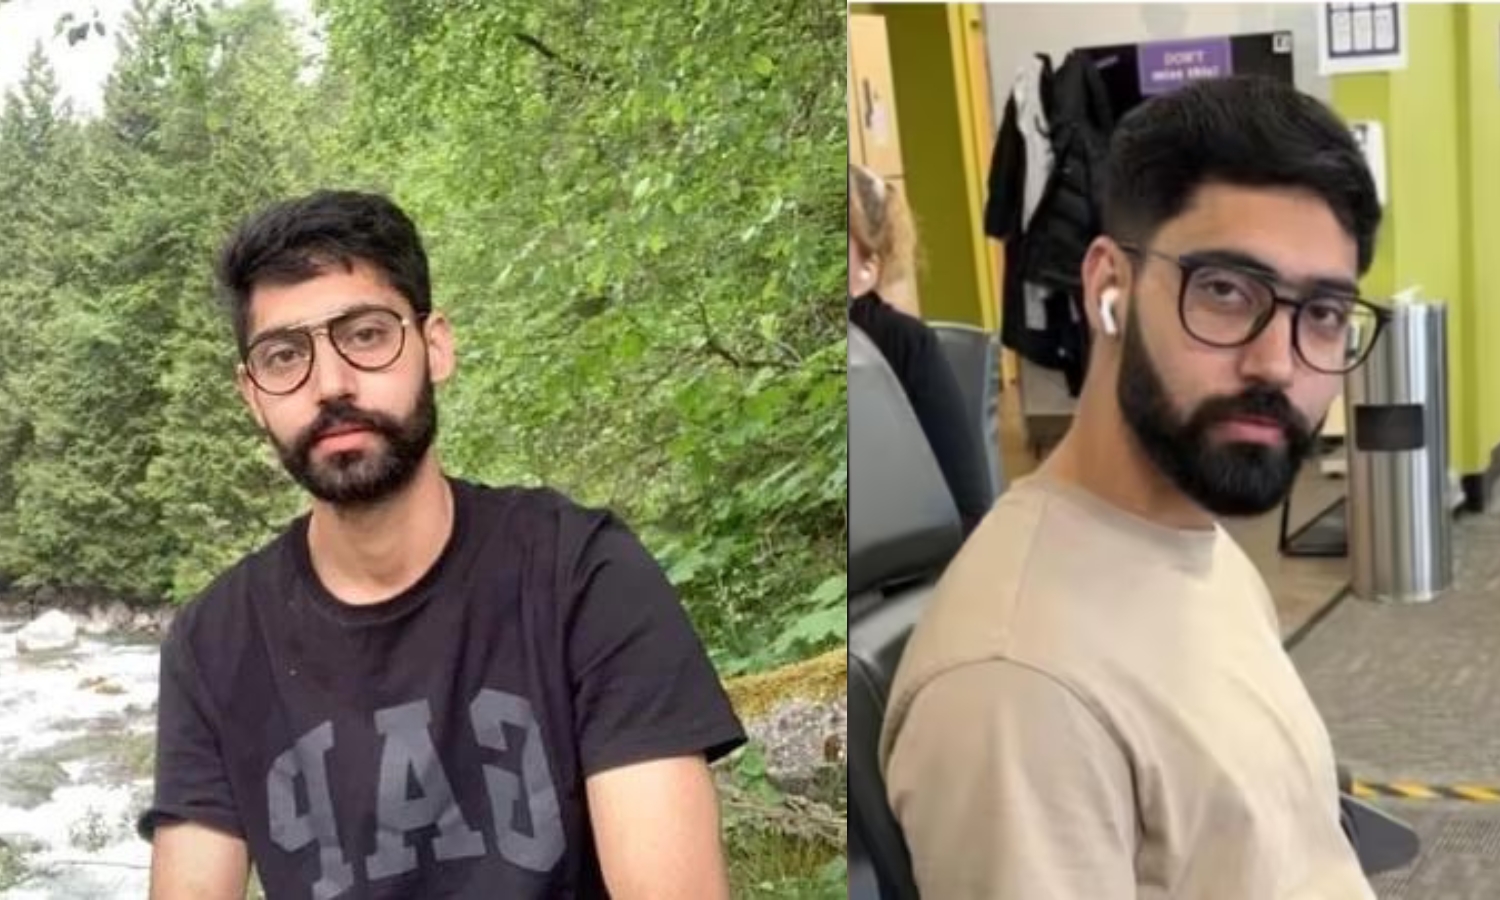 In a tragic incident that has sent shockwaves through the Indian community in Canada, 26-year-old Kulwinder Singh Sohi, an Indian national, was fatally stabbed in a suburb of Vancouver, British Columbia. The incident occurred on April 23, leaving Sohi's loved ones and the local community reeling from the senseless act of violence. According to reports, Sohi was attacked in the suburban area, prompting him to bravely attempt to chase down his assailant despite suffering from stab wounds. However, his valiant efforts were in vain as he ultimately collapsed from his injuries and tragically succumbed to the attack. Canadian law enforcement swiftly responded to the scene and apprehended a 28-year-old suspect believed to be connected to the stabbing. The arrest brings a measure of relief to the grieving family and friends of Sohi, although the profound loss of their beloved Kulwinder remains an indelible tragedy. The untimely death of Sohi has sparked widespread sorrow and condemnation, as members of the Indian diaspora in Canada and beyond mourn the loss of a young life cut short by violence. Sohi's friends and acquaintances have fondly remembered him as a kind-hearted individual with a bright future ahead of him, making his untimely demise all the more poignant. As investigations into the circumstances surrounding Sohi's death continue, authorities are working diligently to ensure that justice is served and that those responsible for perpetrating this heinous crime are held accountable to the fullest extent of the law. In the meantime, the community rallies together in support of Sohi's grieving family, offering condolences, prayers, and solidarity during this difficult time. The tragic death of Kulwinder Singh Sohi serves as a sobering reminder of the need for greater efforts to combat senseless acts of violence and ensure the safety and security of individuals in communities worldwide. As tributes pour in for Sohi, his memory will be cherished by all those whose lives he touched, and his legacy will endure as a testament to his spirit and resilience in the face of adversity.